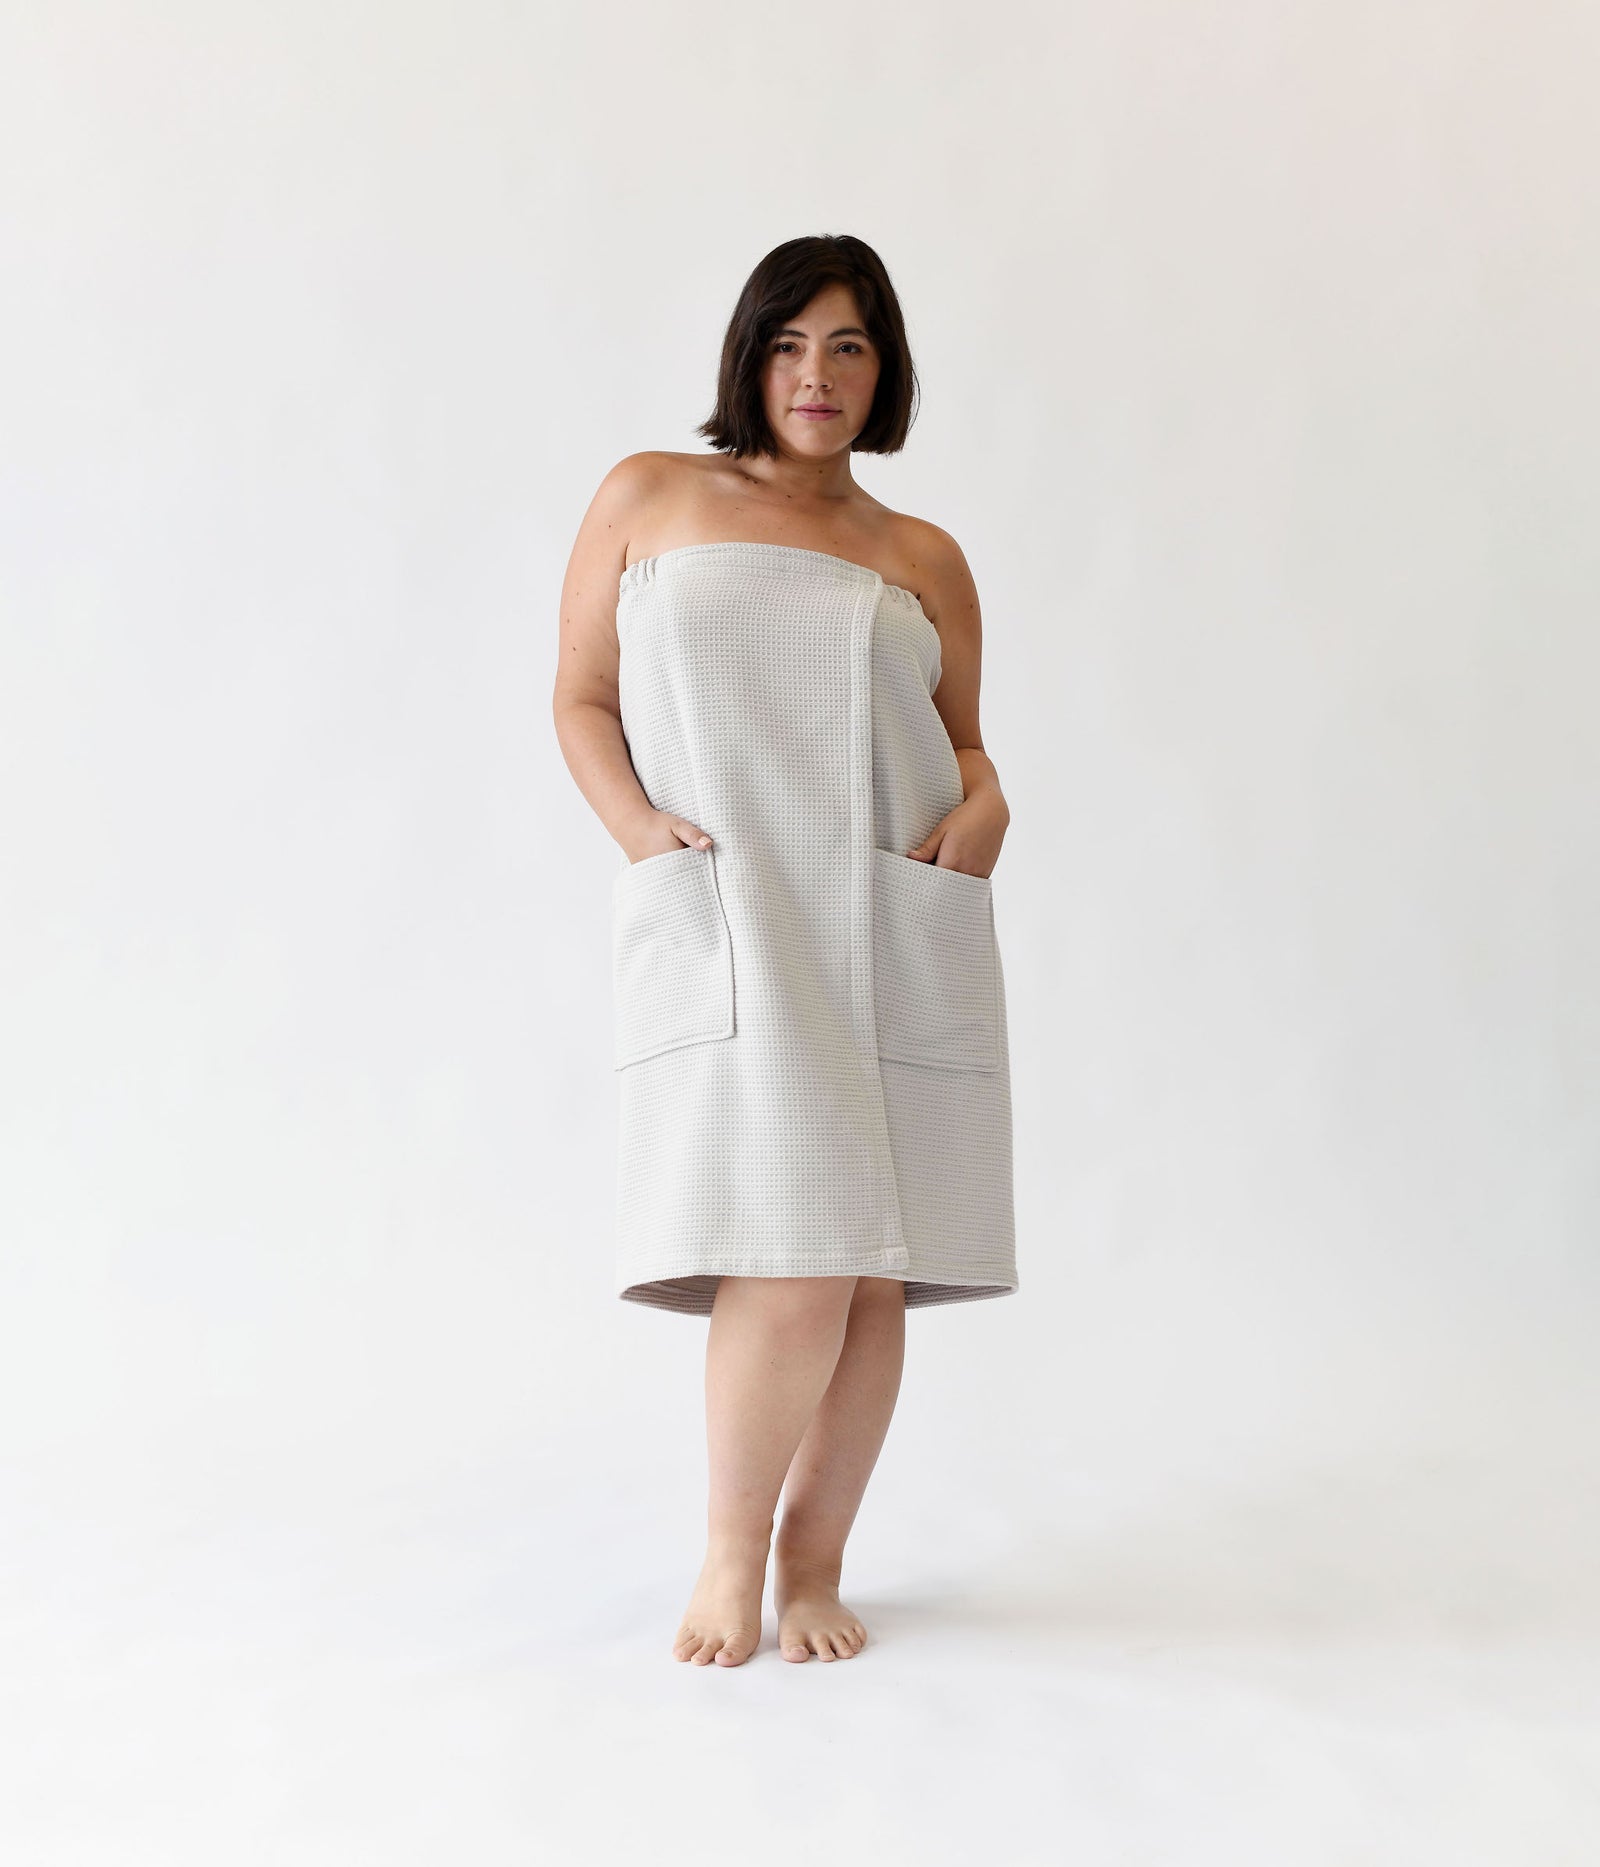 Light Grey Waffle Bath Wrap. The bath wrap is shown being worn by a woman. Photo was taken with a white background.